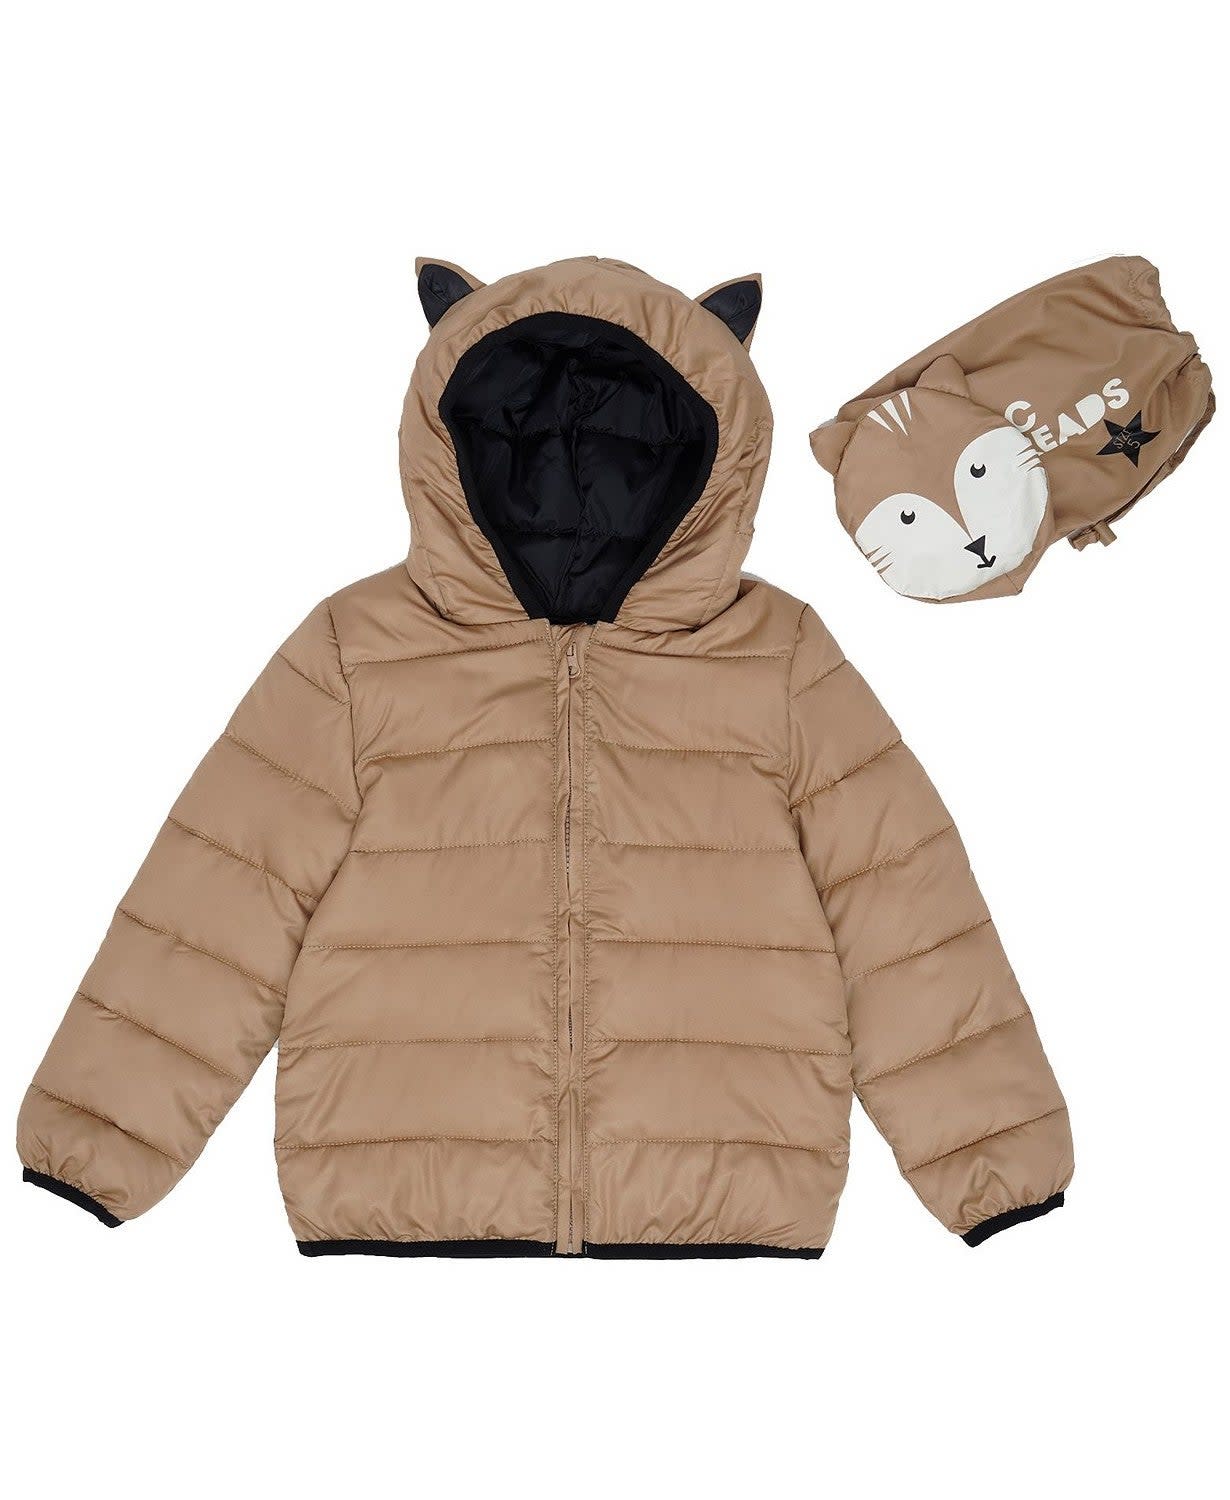 Epic Threads Little Boys Fox Hooded Full Zip Packable Jacket with Matching Bag